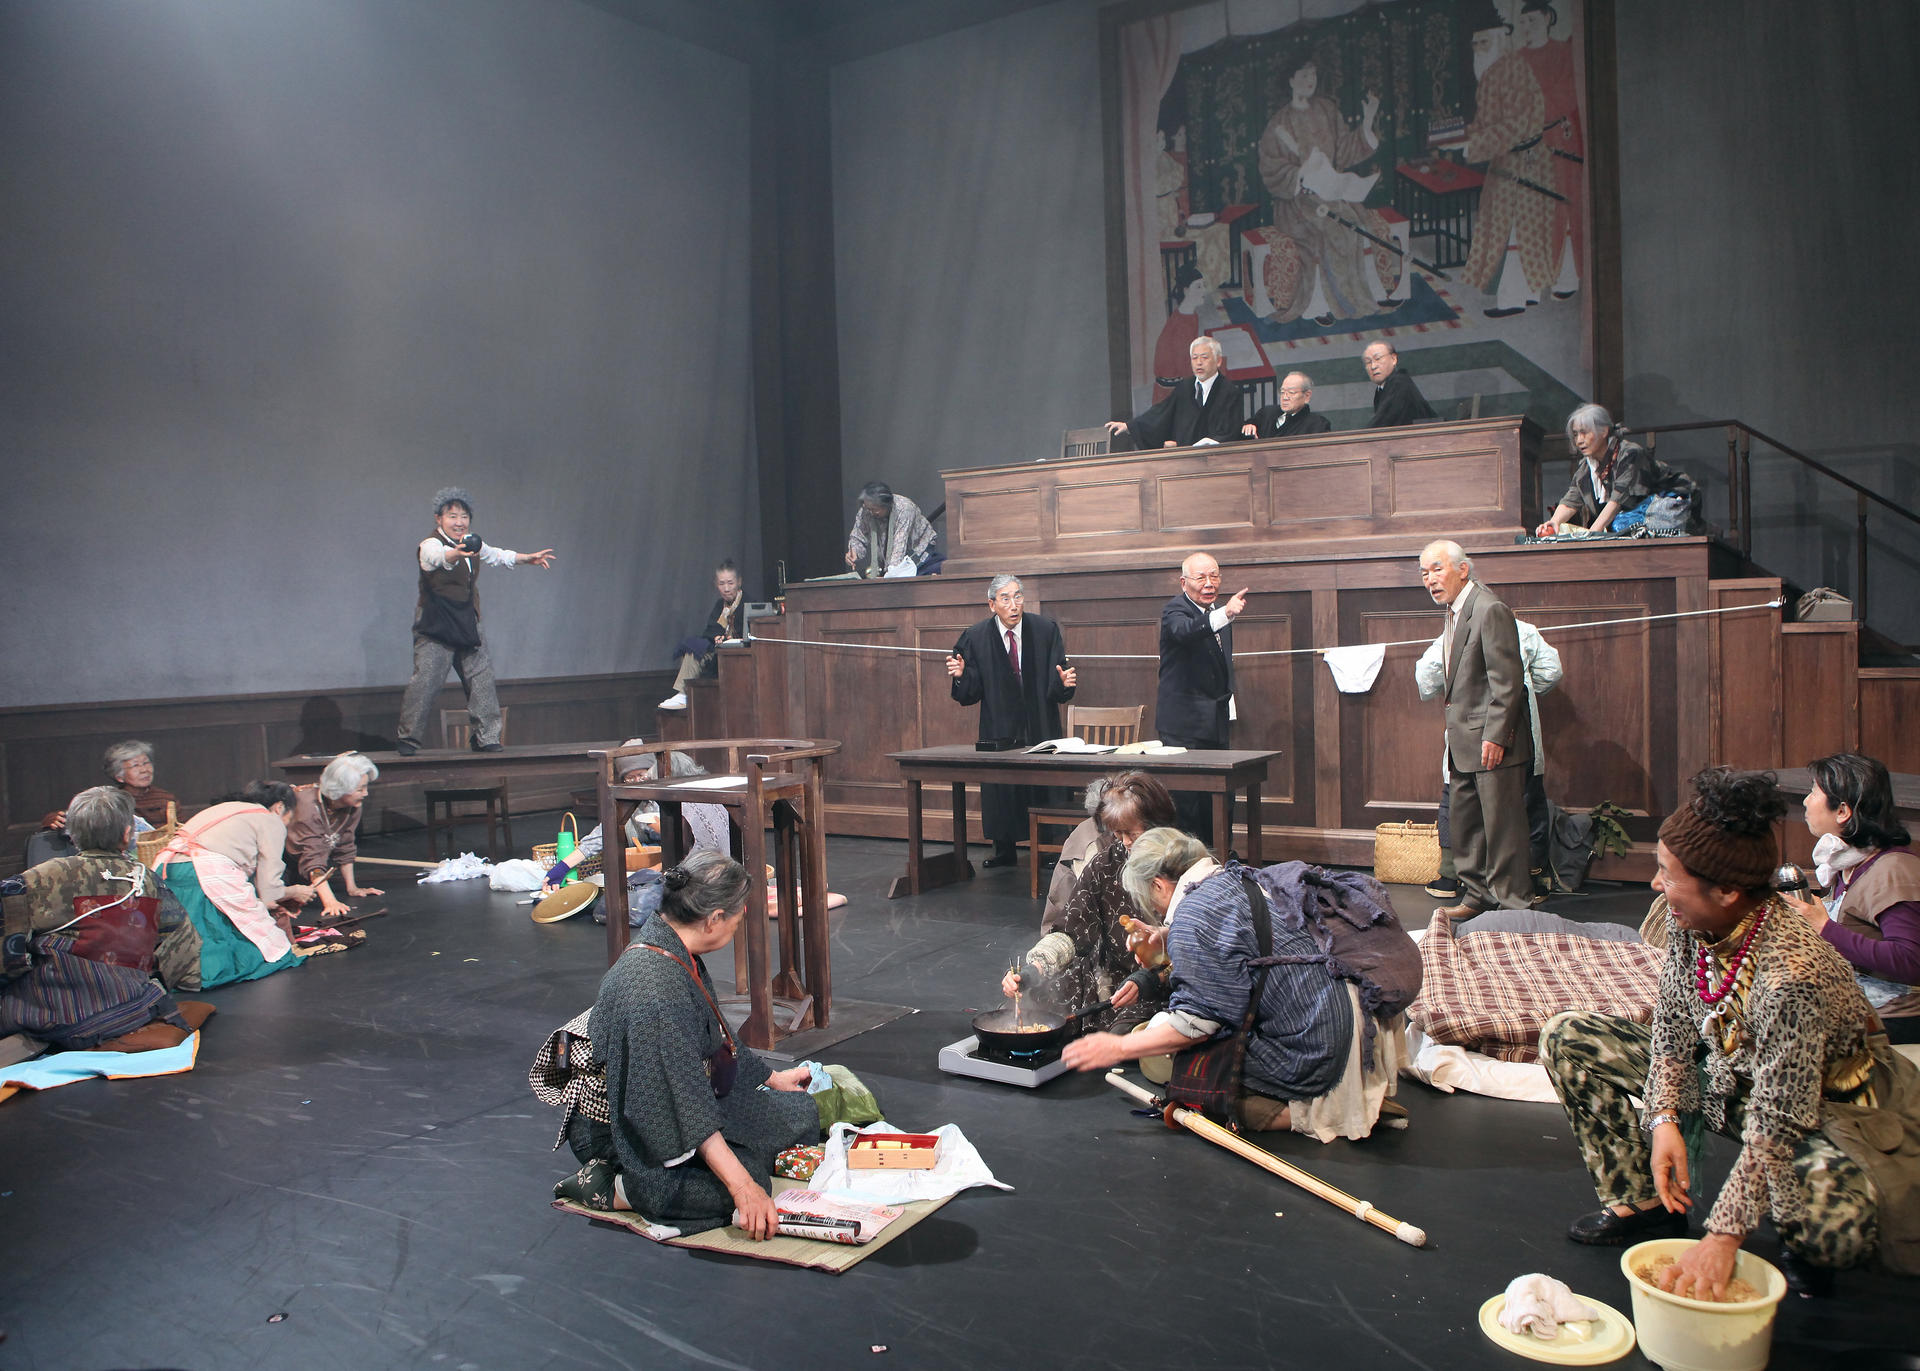 In Ravens, We Shall Load Bullets, a 22-strong cadre of elderly women - the "original rebels" grown old, says director Yukio Ninagawa - take over a courtroom where several young radicals are on trial. Photos: Maiko Miyagawa